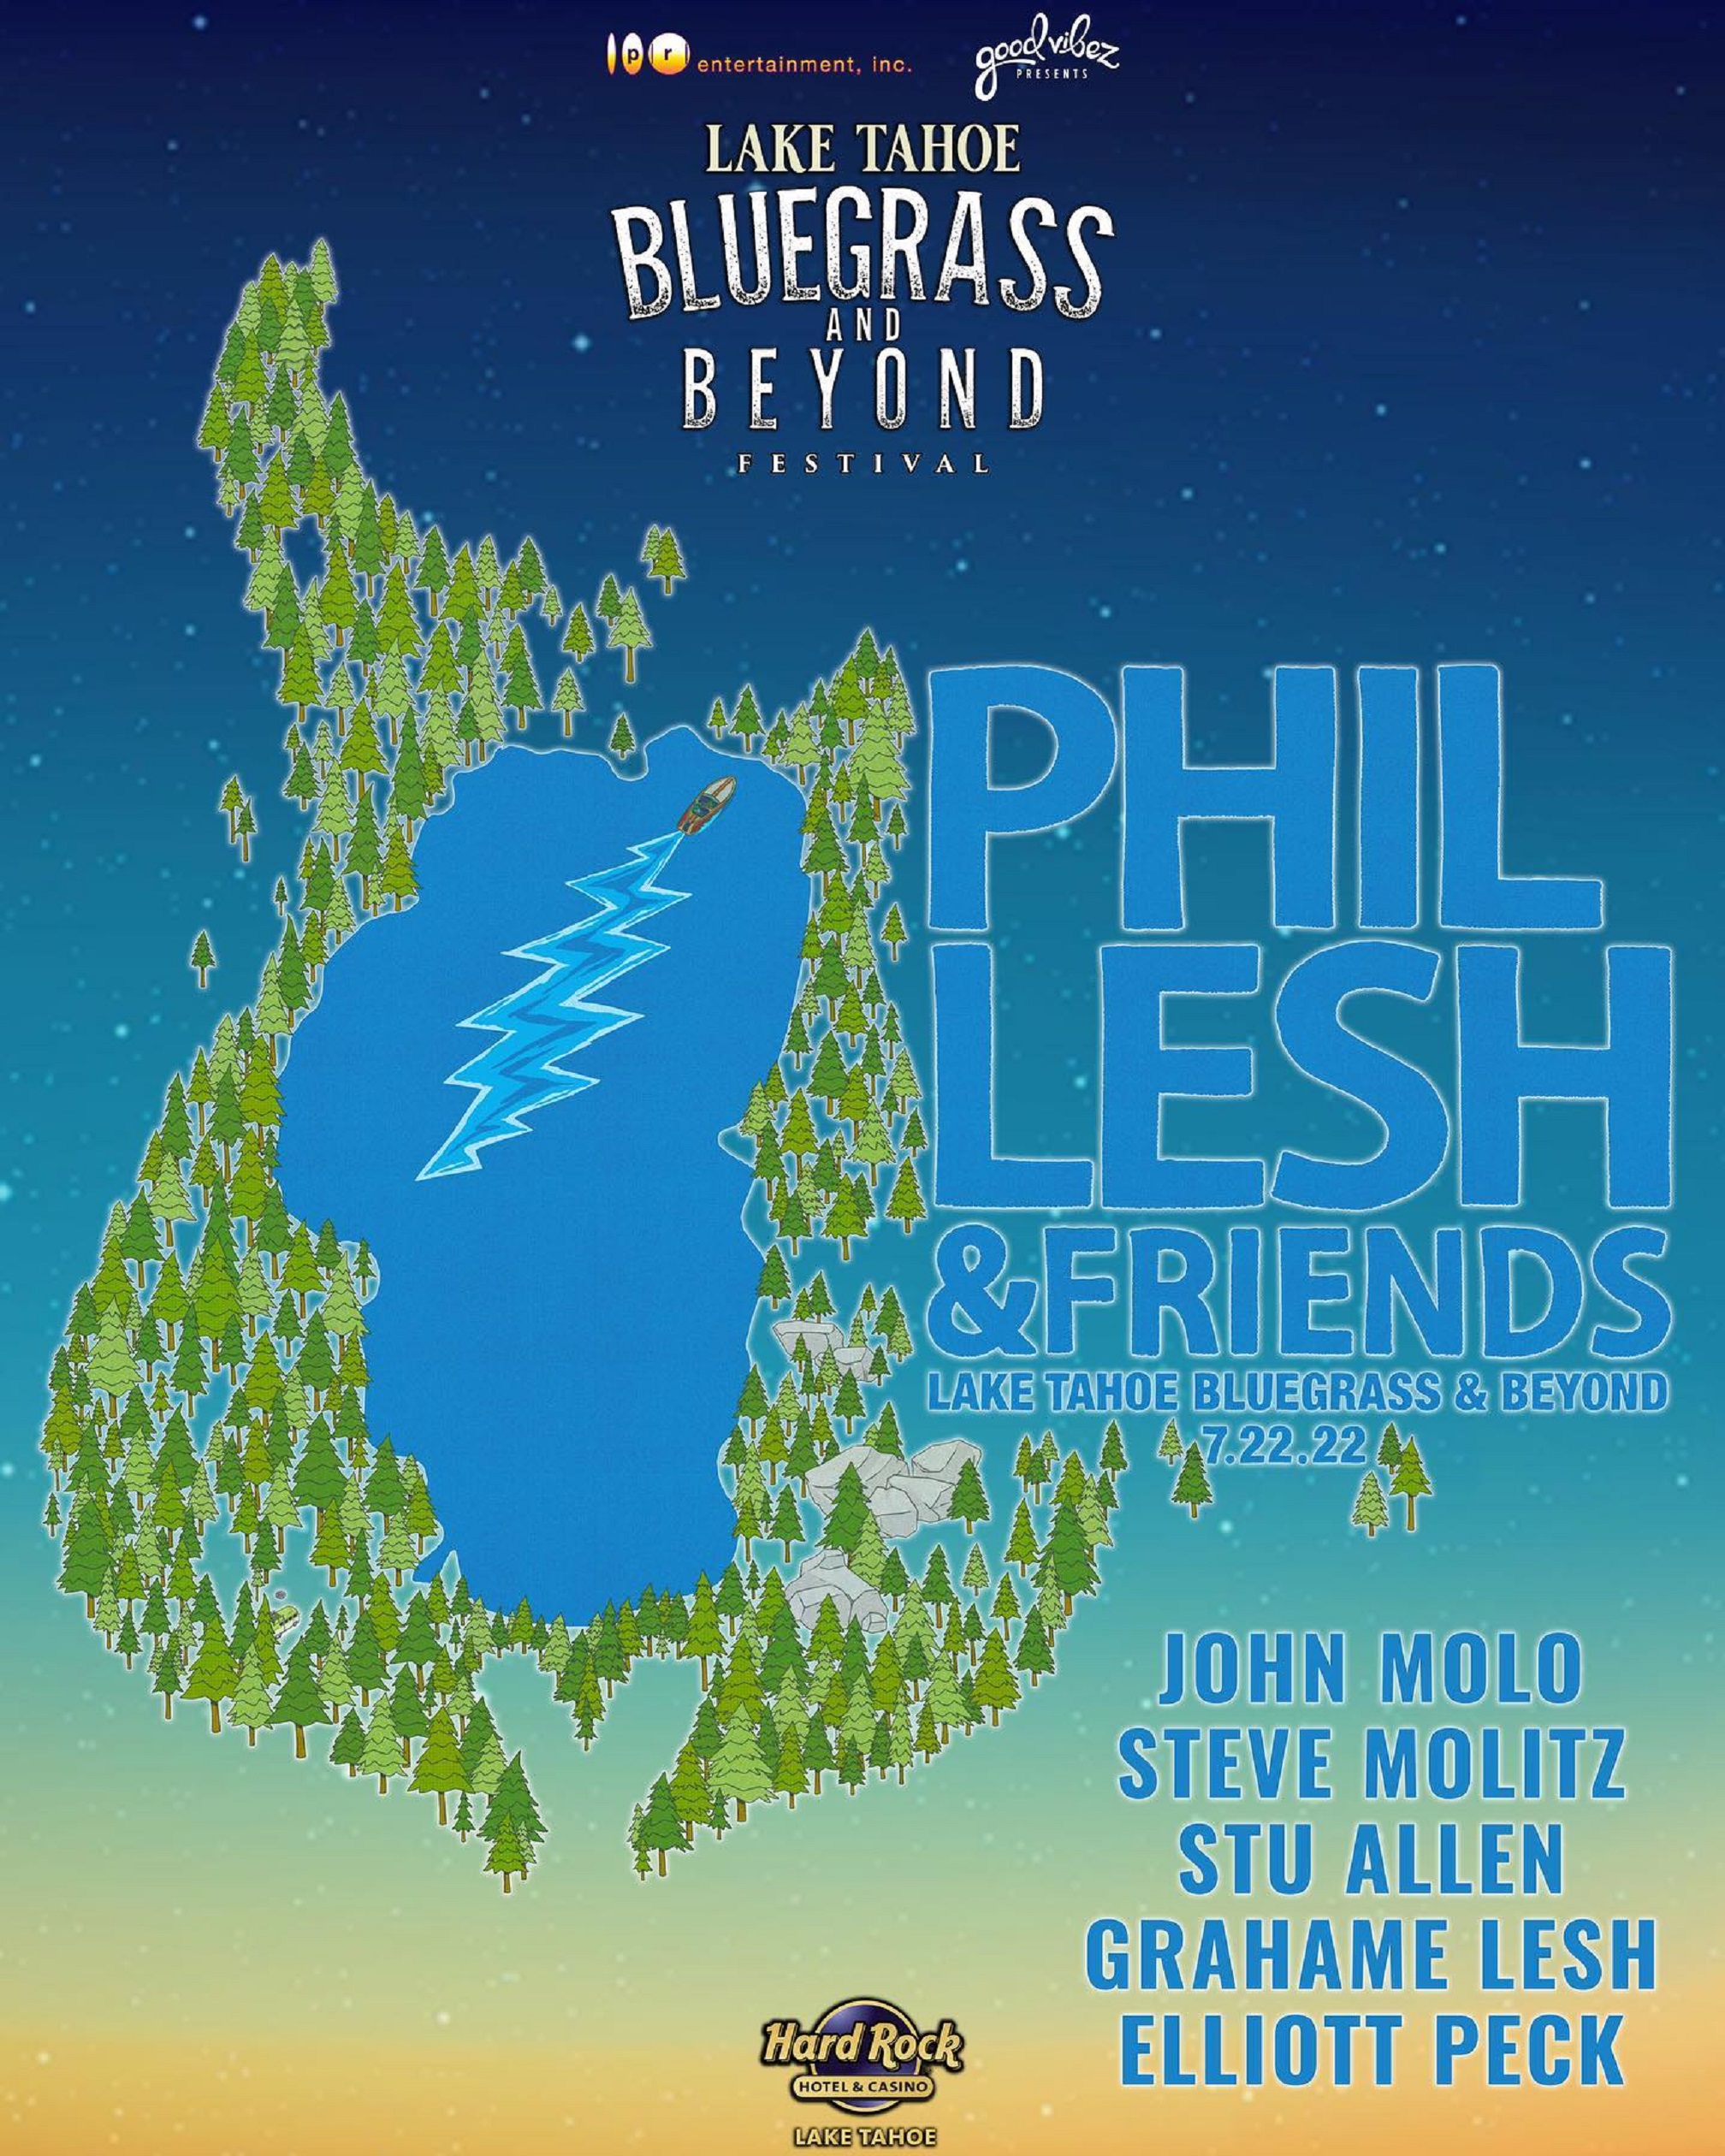 Phil Lesh & Friends confirmed for Friday, July 22